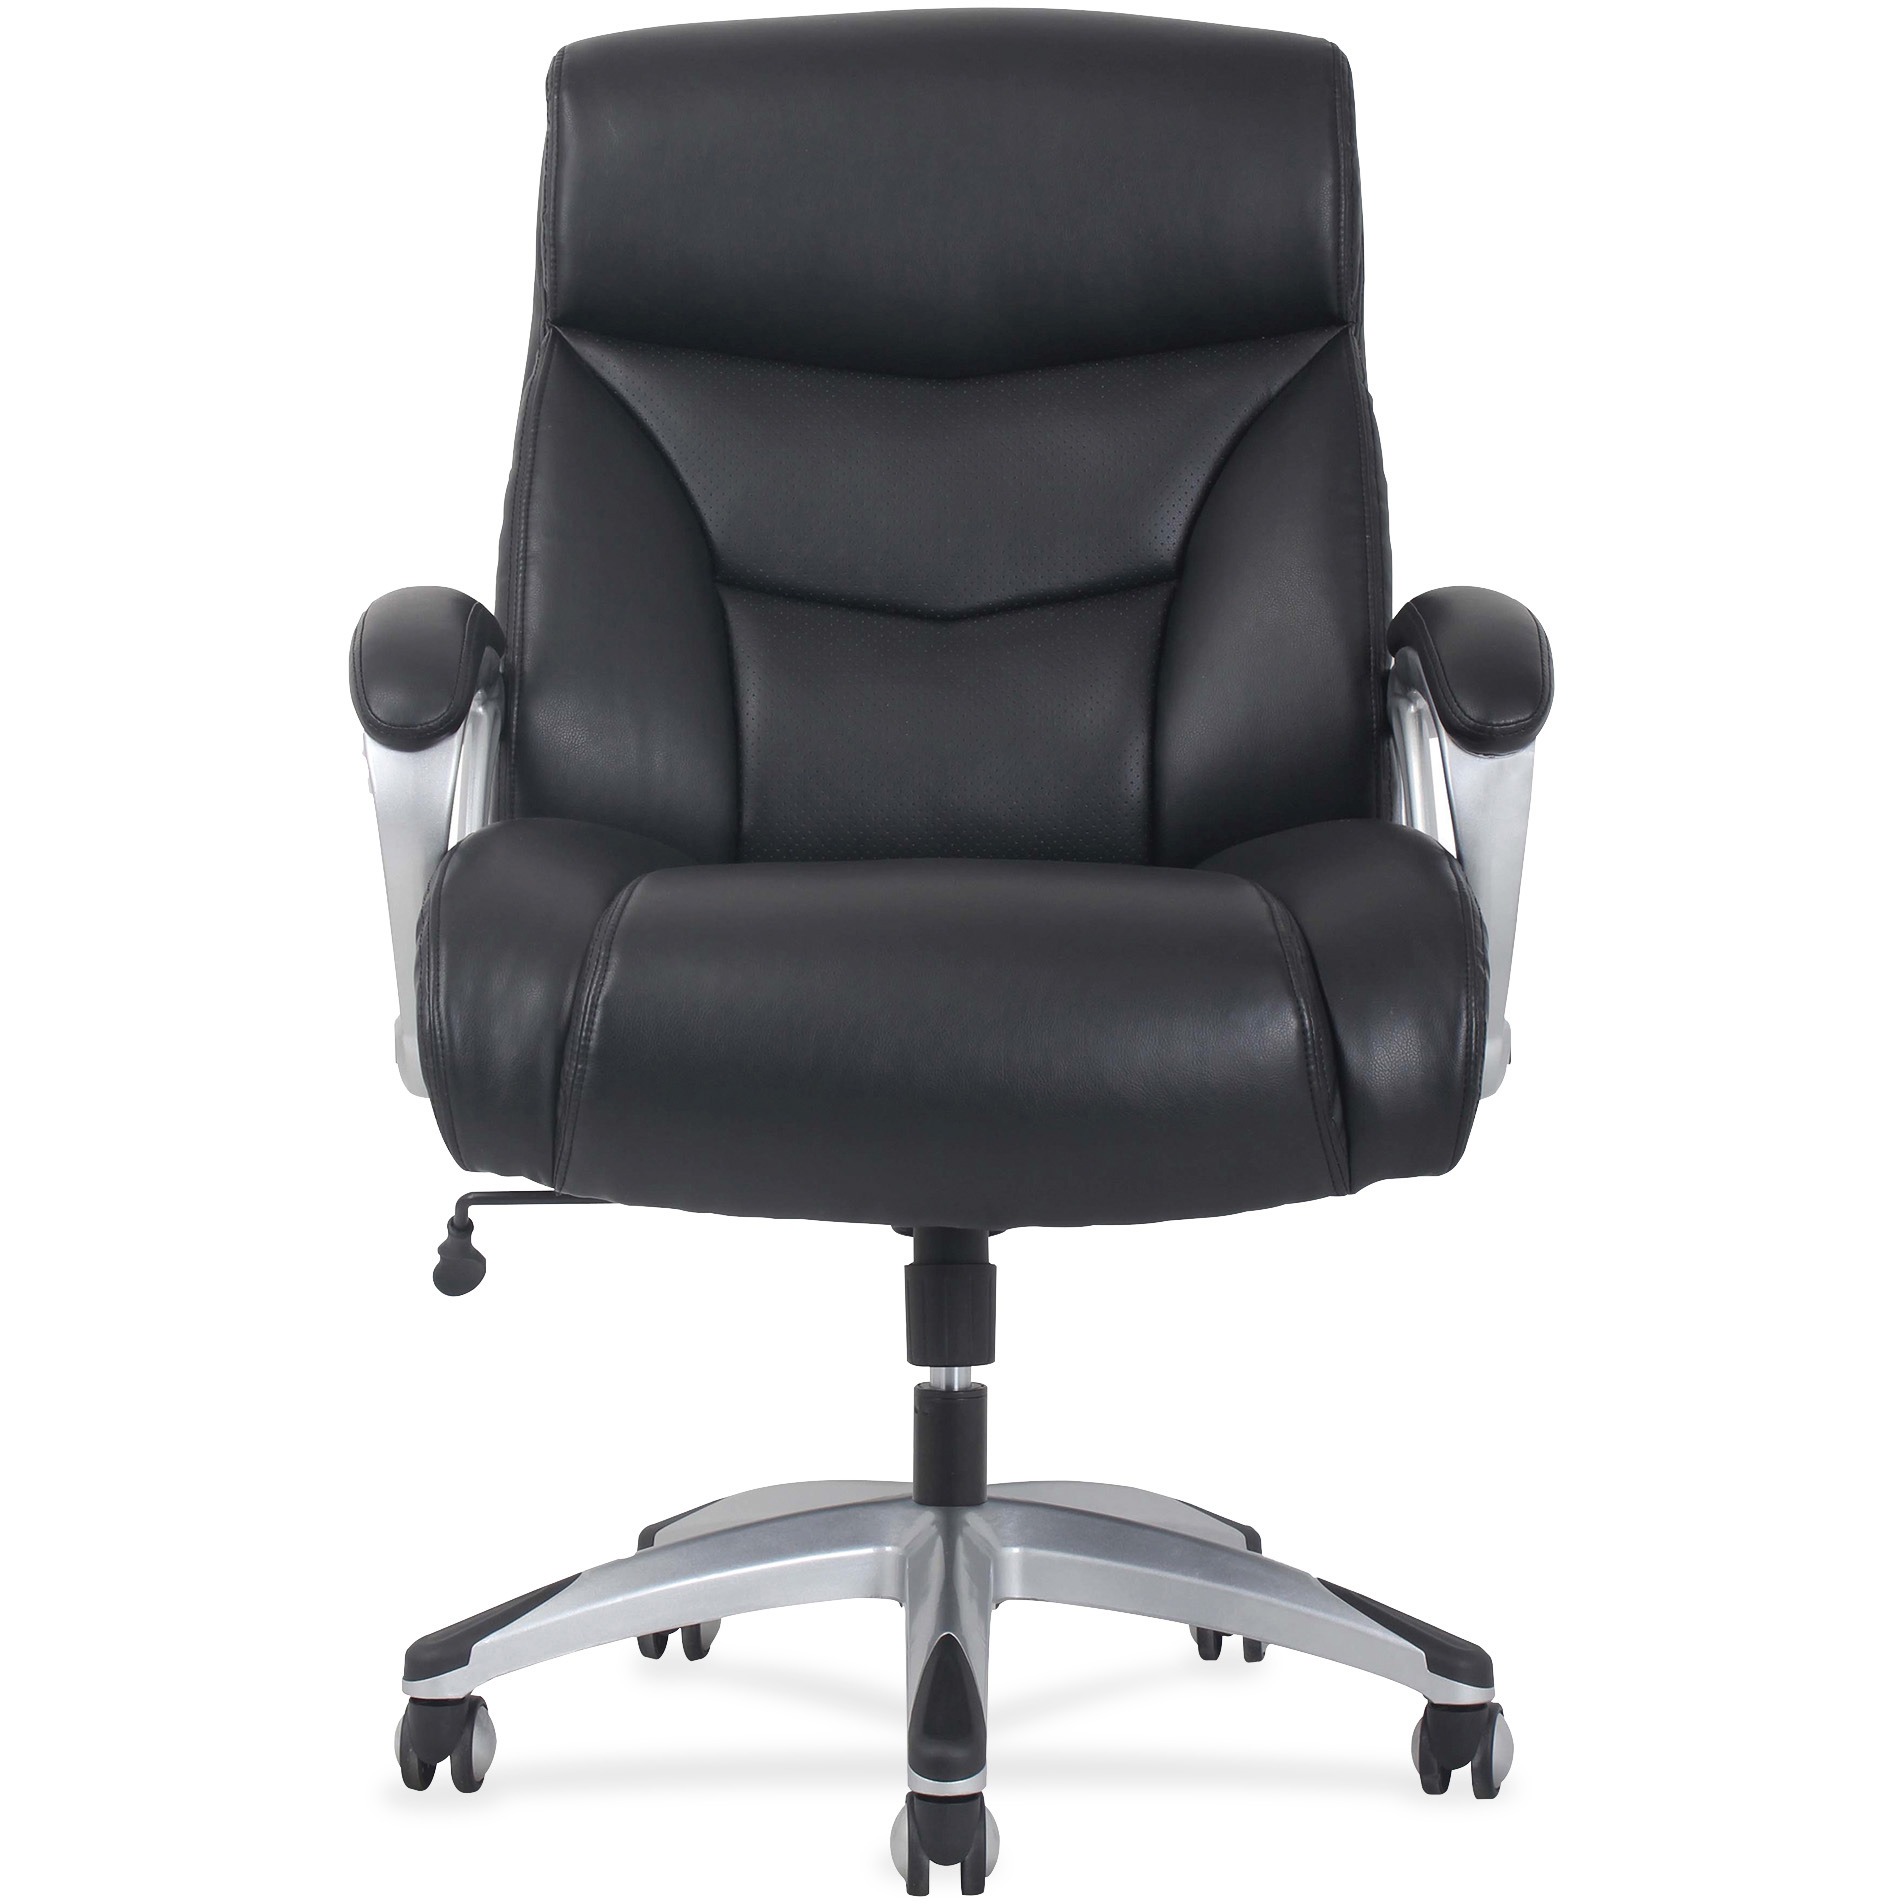 Basyx by HON BigTall Leather High-back Executive Chair